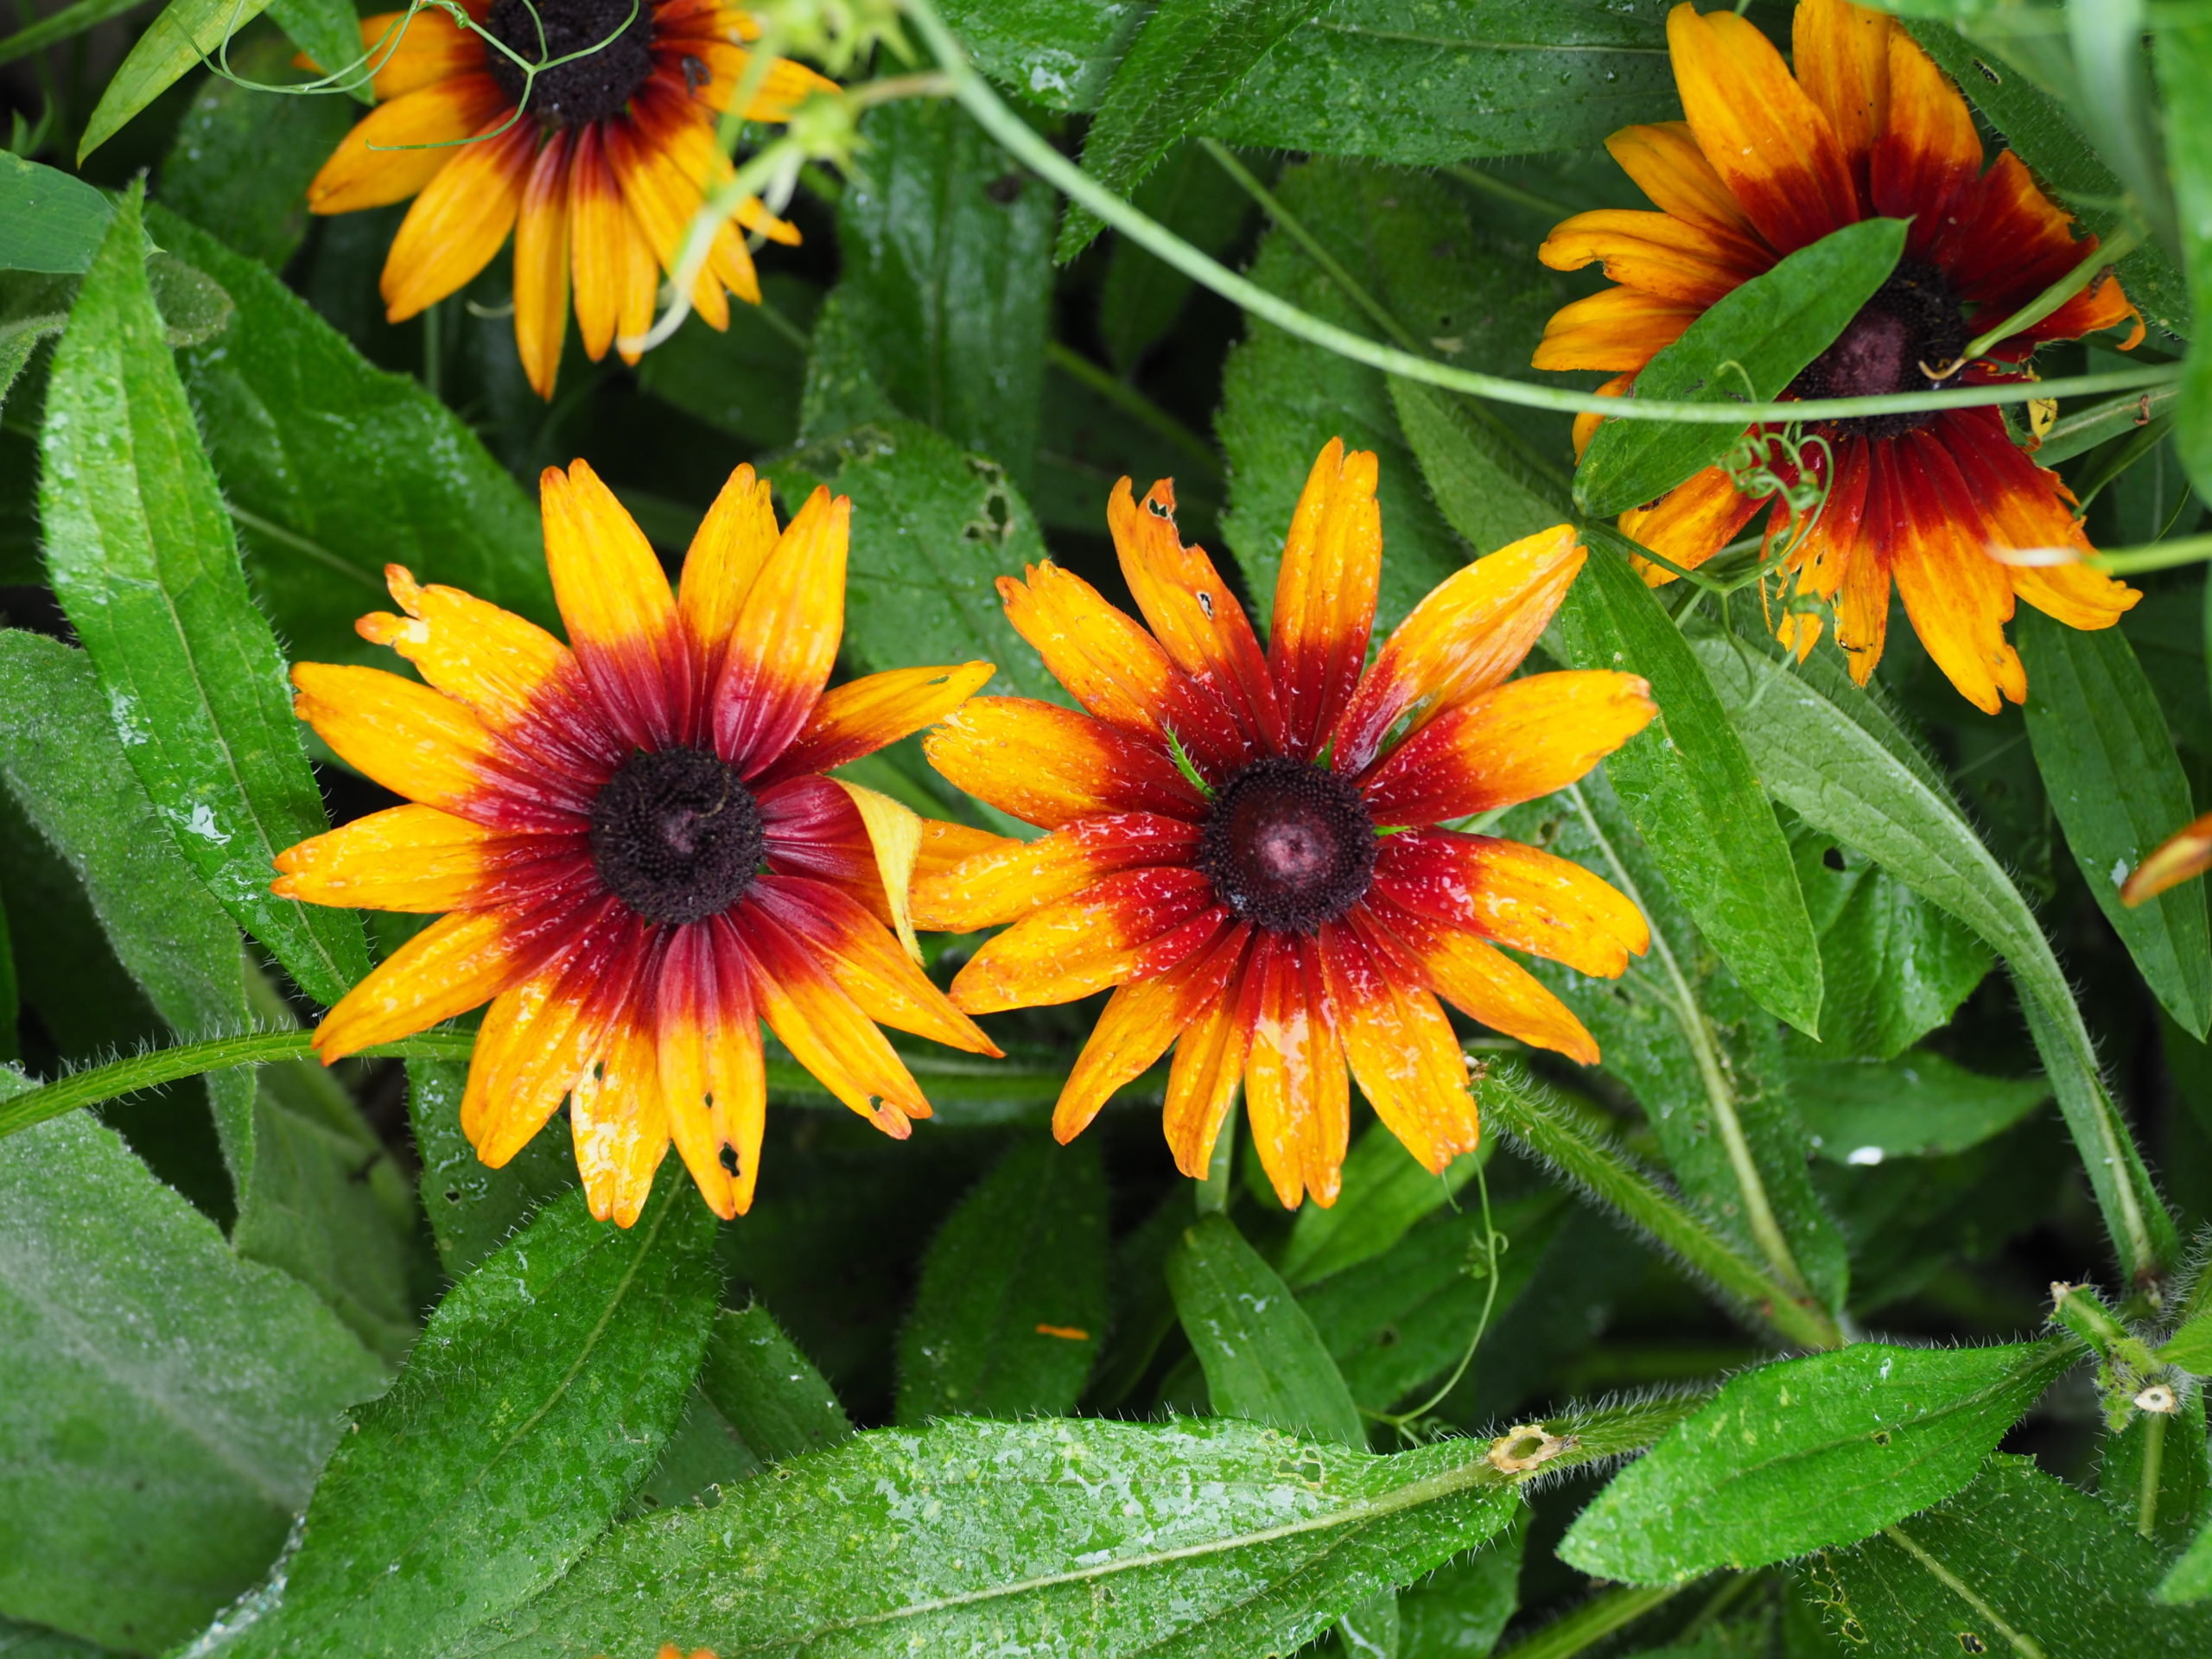 Many Rudbeckias put on a great fall show, but this variety, Cappuccino, flowers all summer and into the fall. The mature plant is about 2 feet wide with flowers on 10-to-15-inch stems. Also great for cuts.